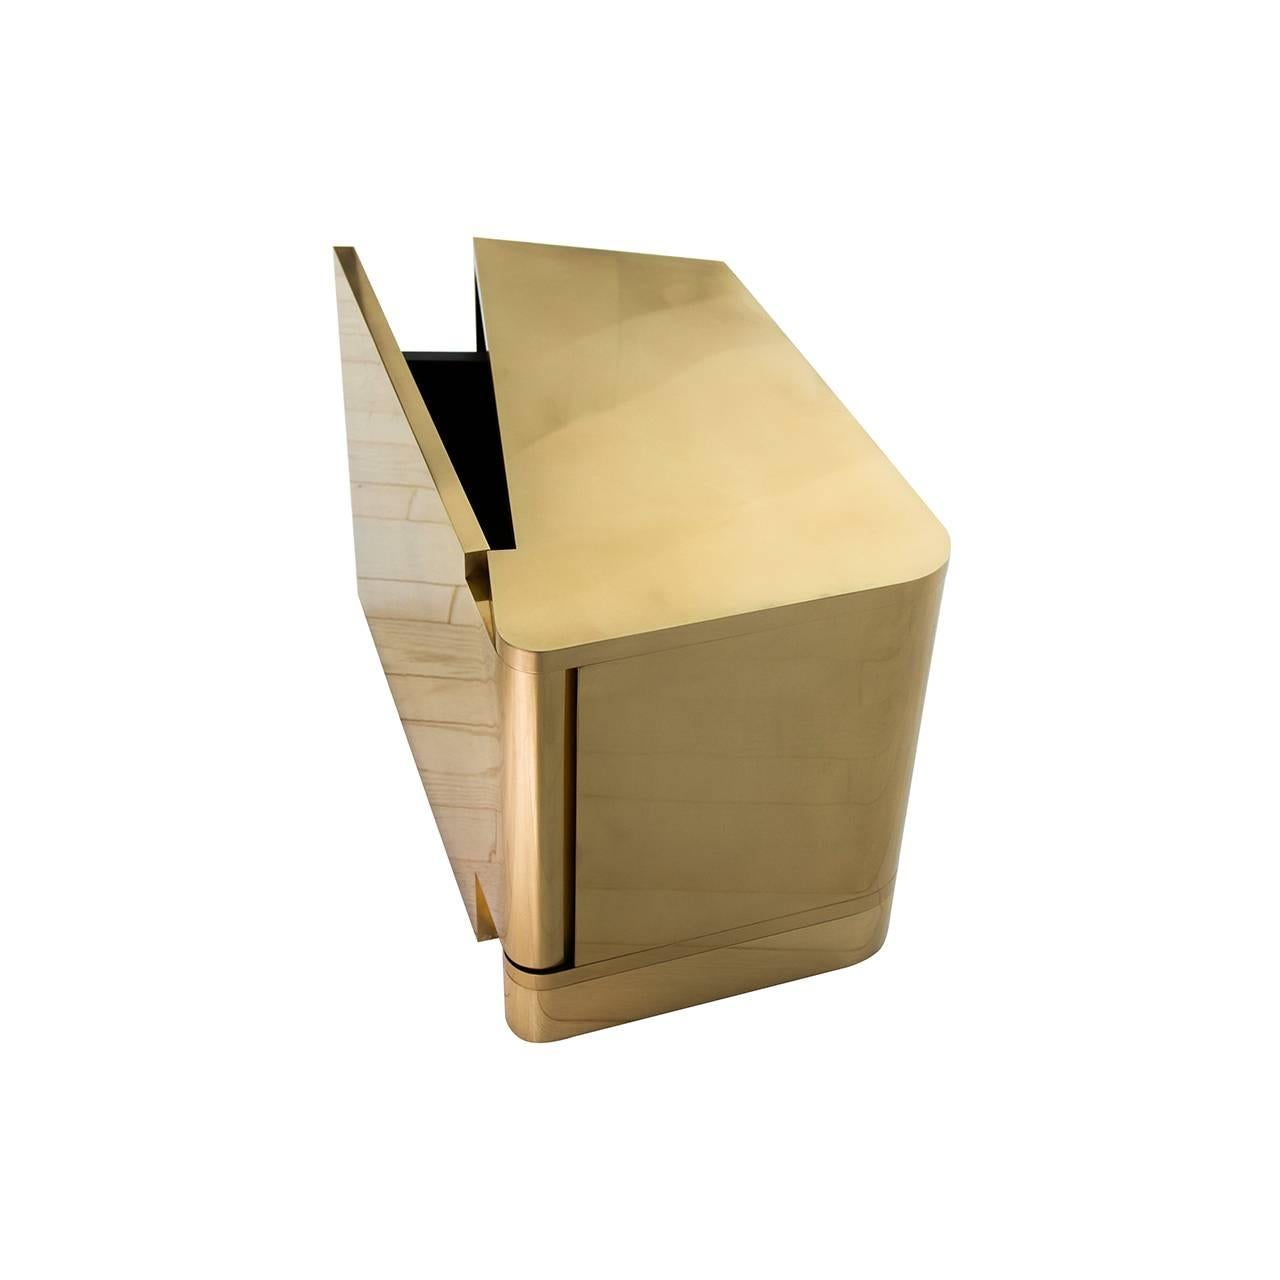 Sleek, modern and versatile. The MMXVI BC series shown in polished brass can also be fabricated with a variety of hand finished brass options including hand brushed, burnished, patinated and silvered brass. The nightstands function well as a set or